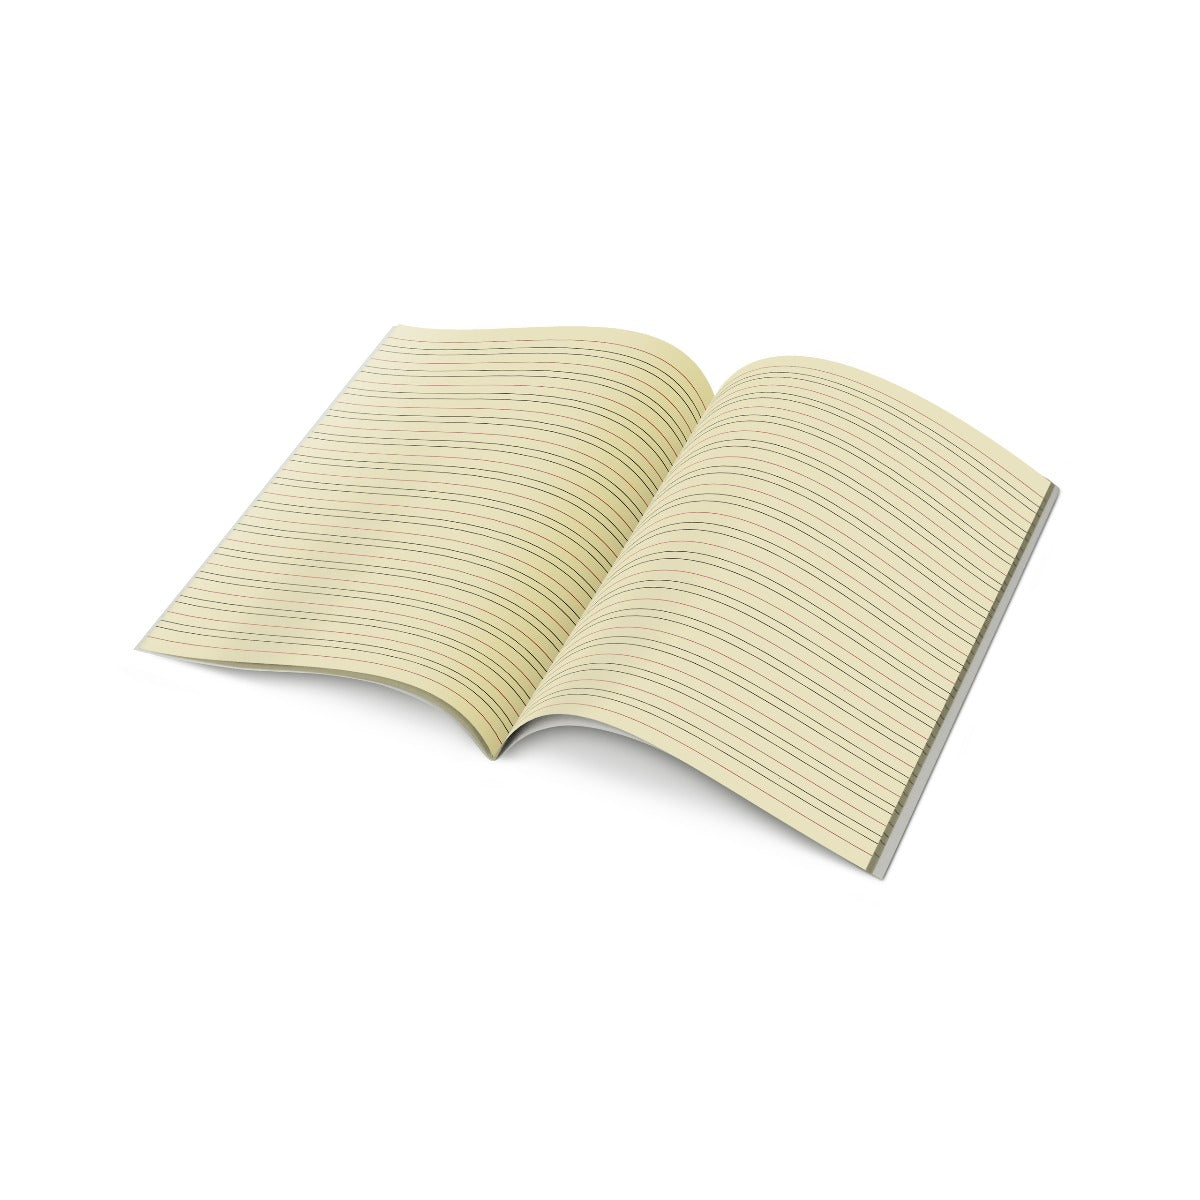 Tinted Paper Handwriting Exercise Book - 9